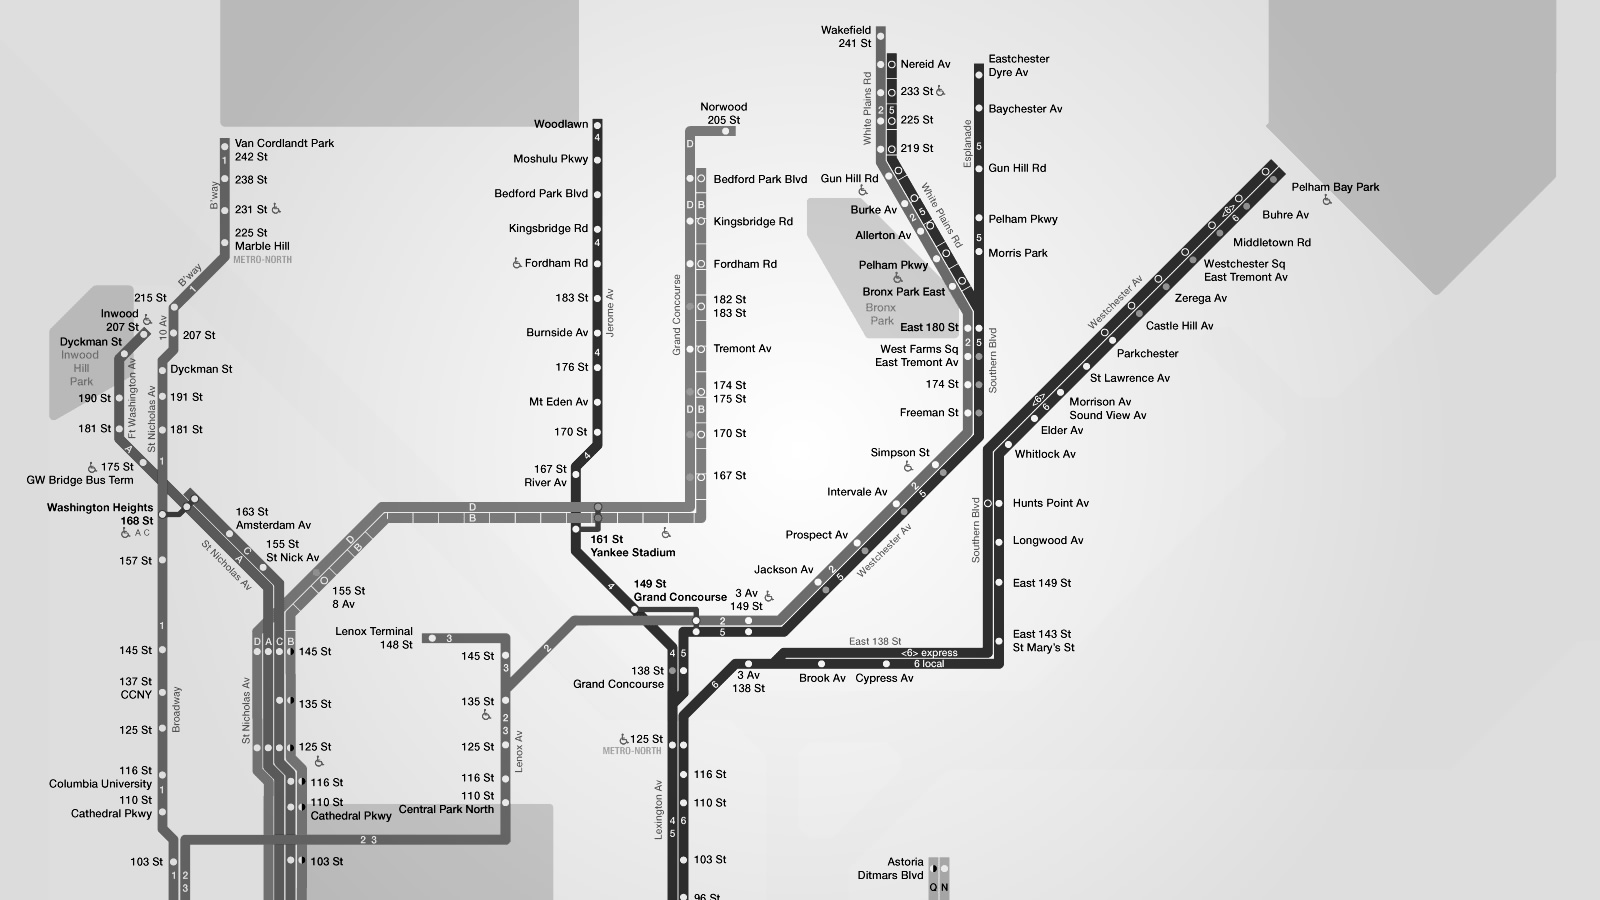 A portion of a New York City subway map